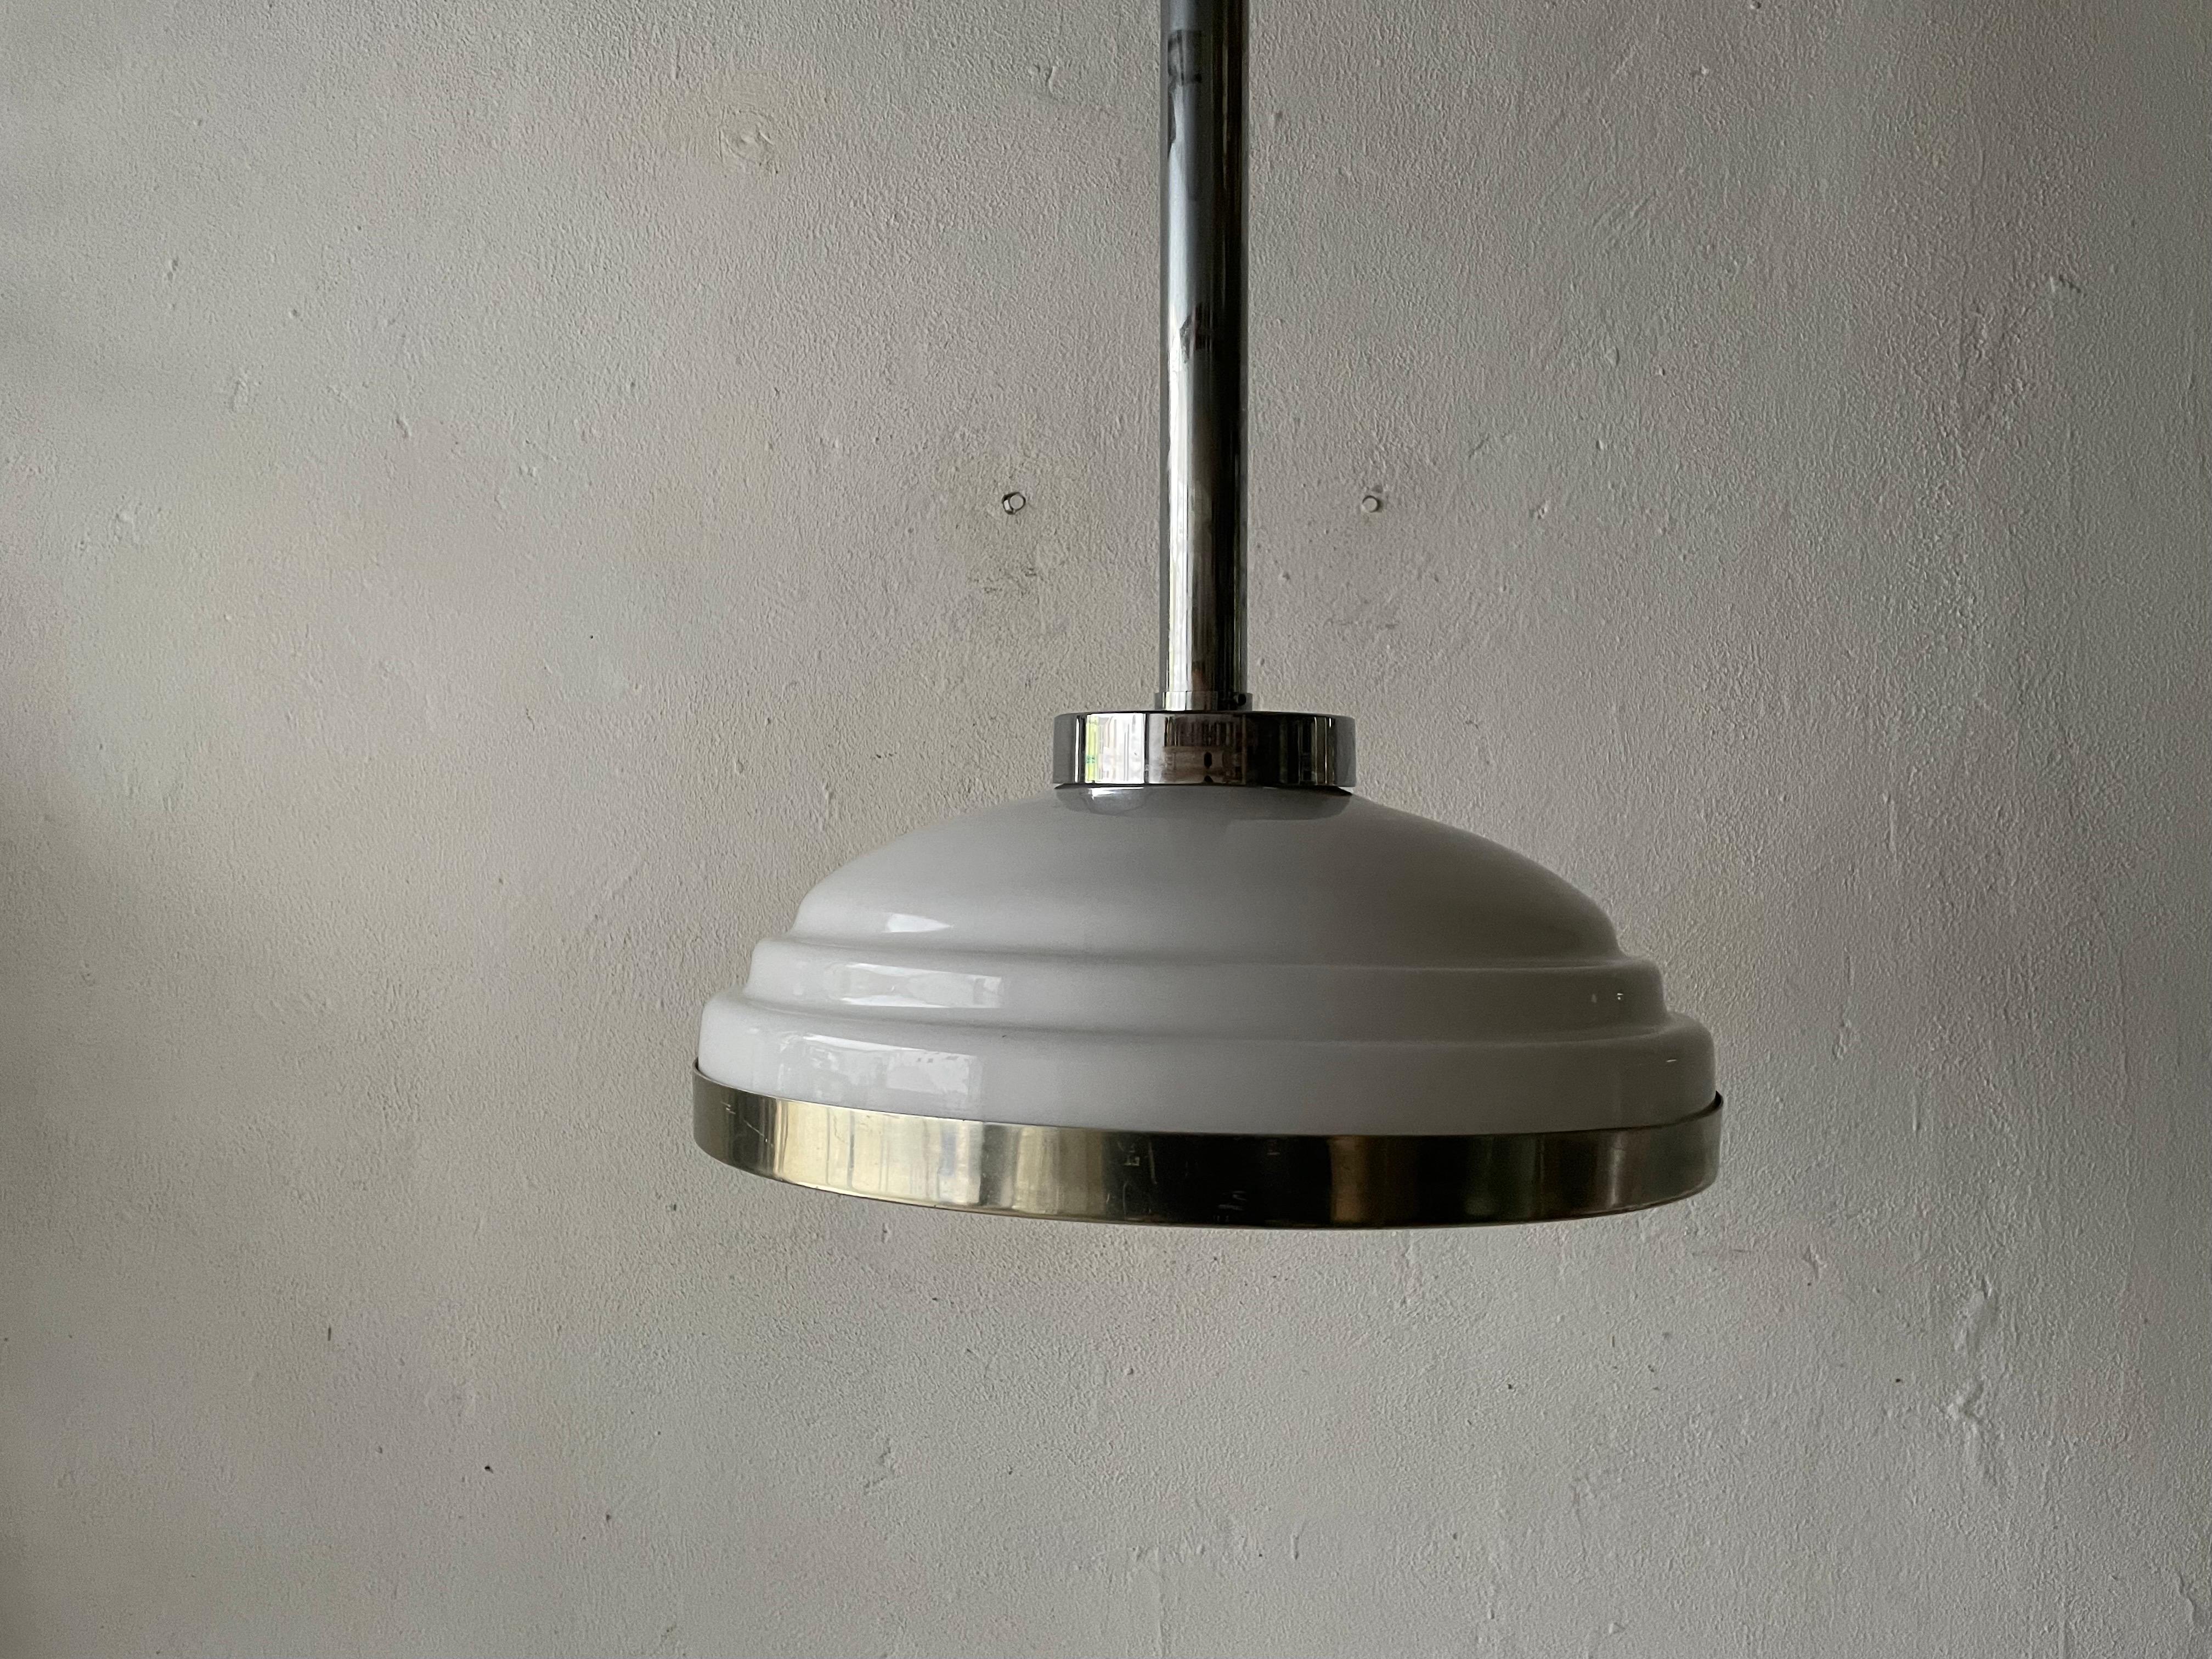 Art Deco Opaline Glass & Chrome Ceiling Lamp, 1940s, Italy

This lamp works with 3x E14 inside, E27 outside

Wired and Suitable to use with 110V-220V in all countries.

Please do not hesitate to ask us for any type of questions.

Measurements: